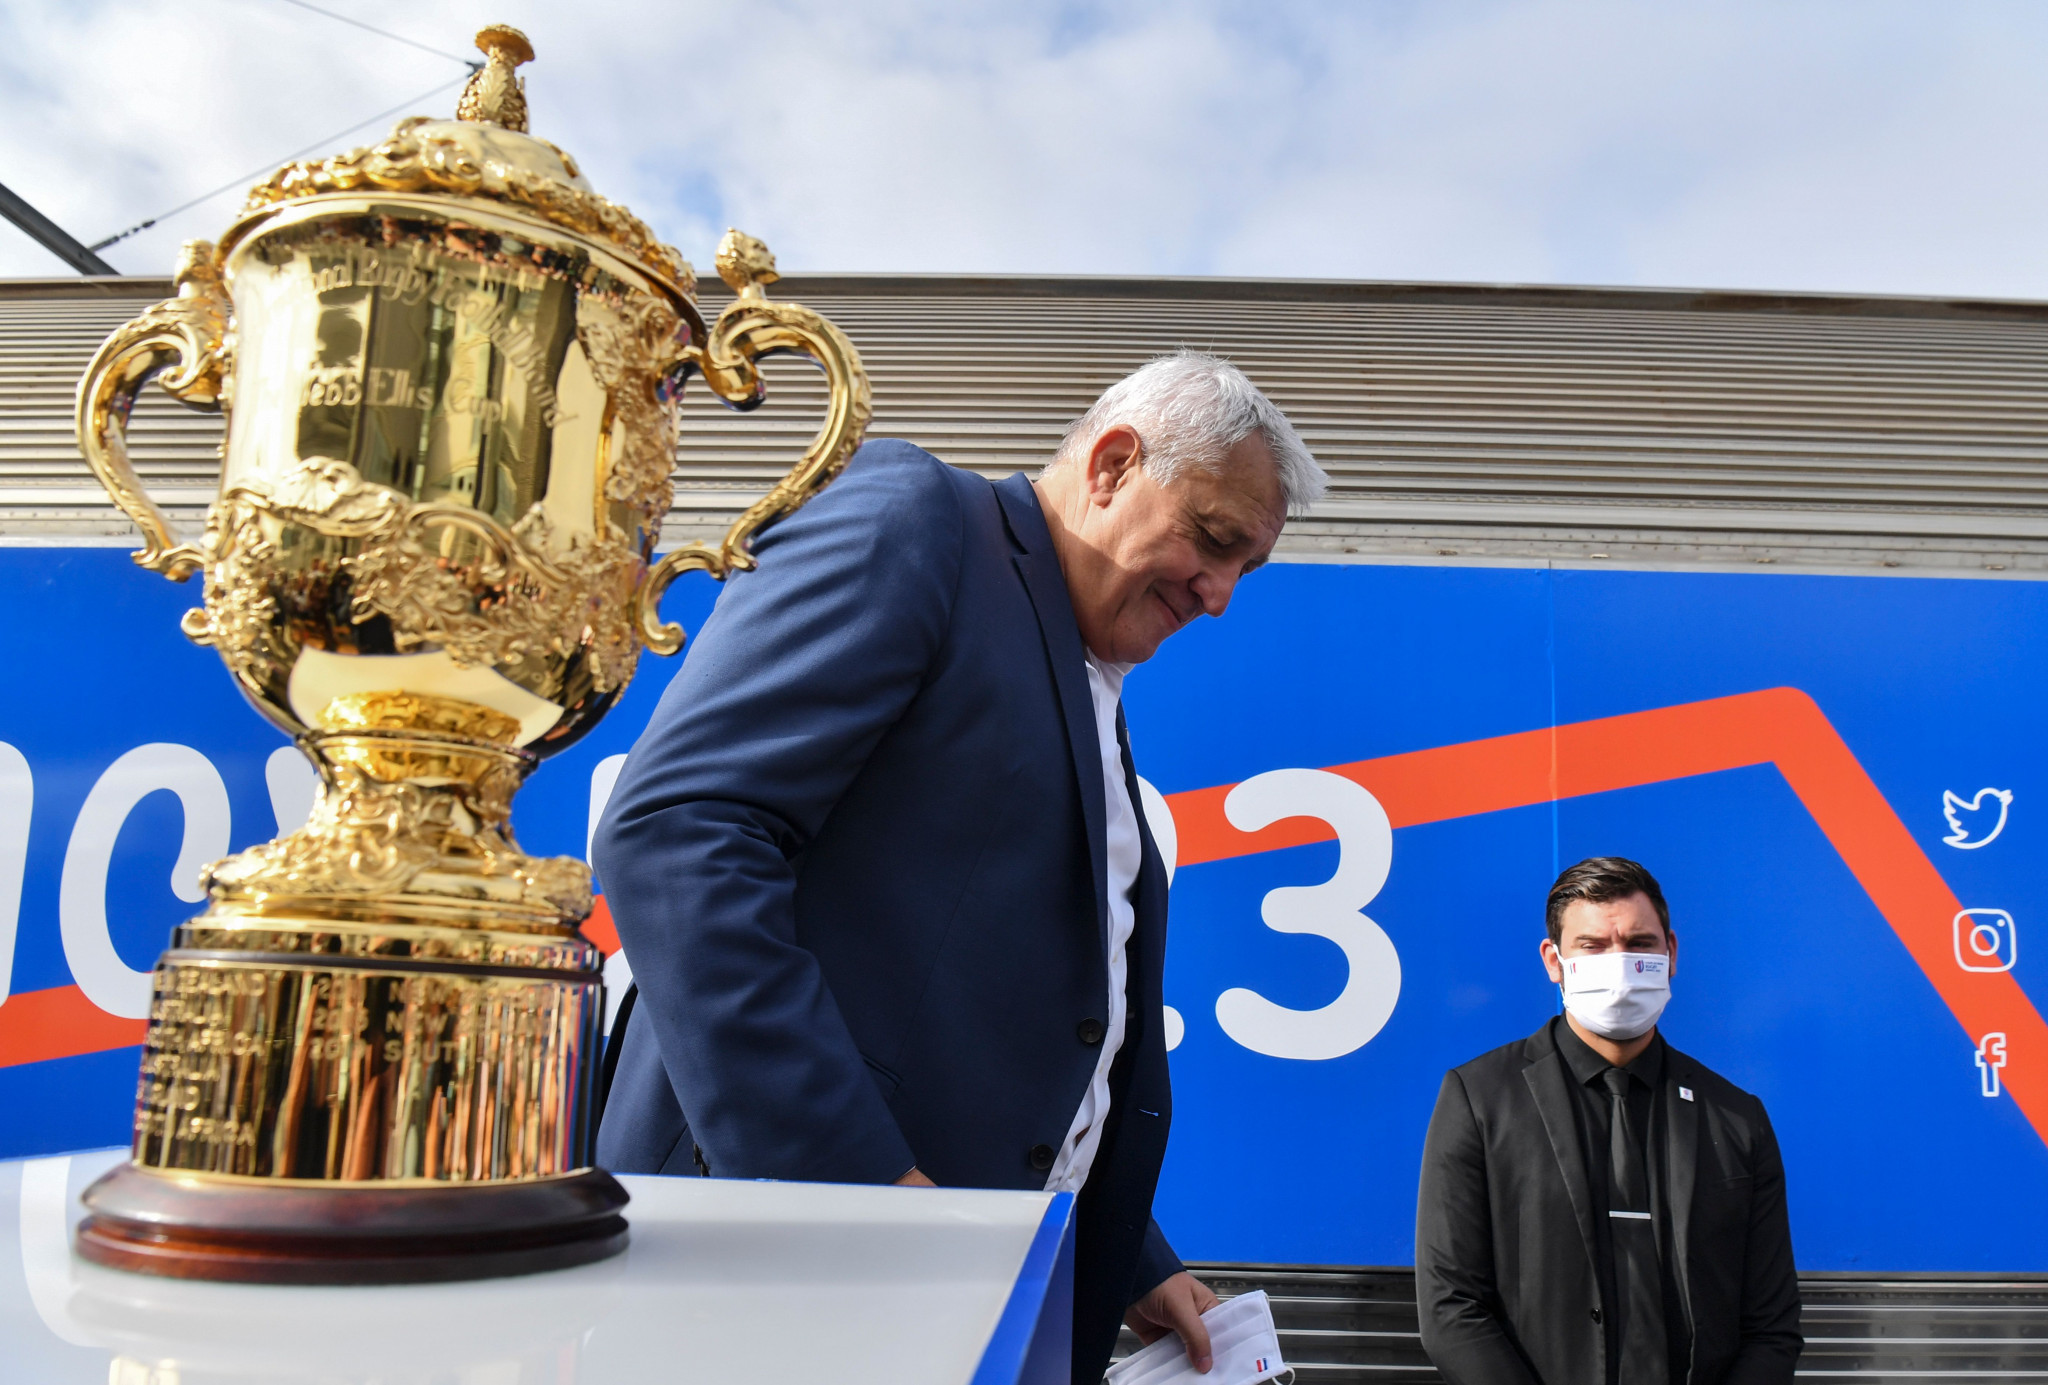 Atcher lawyers slam "smear campaign" against sacked Rugby World Cup chief